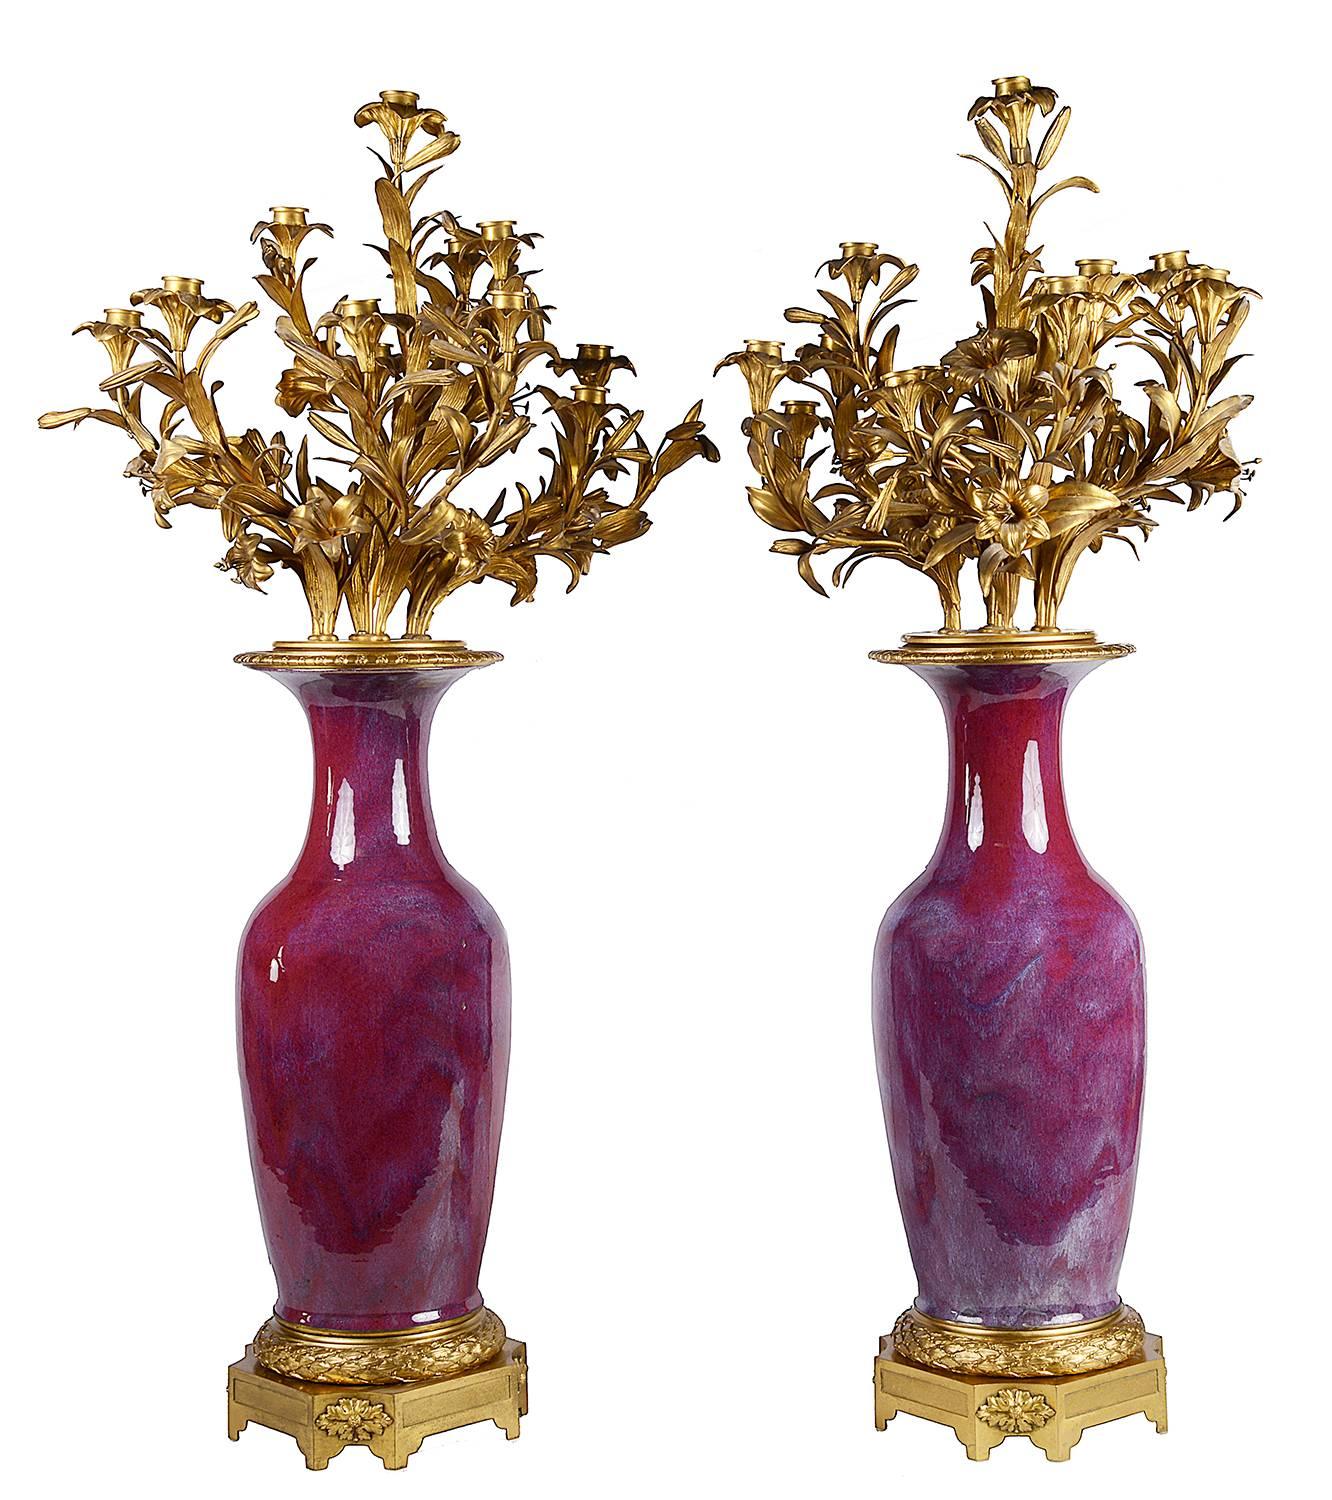 A very impressive and imposing pair of 19th century Chinese Sang De Boeuf vases with wonderful French gilded ormolu 14 branch floral and leaf candelabra, mounted on leaf and floral mounted plinth bases.